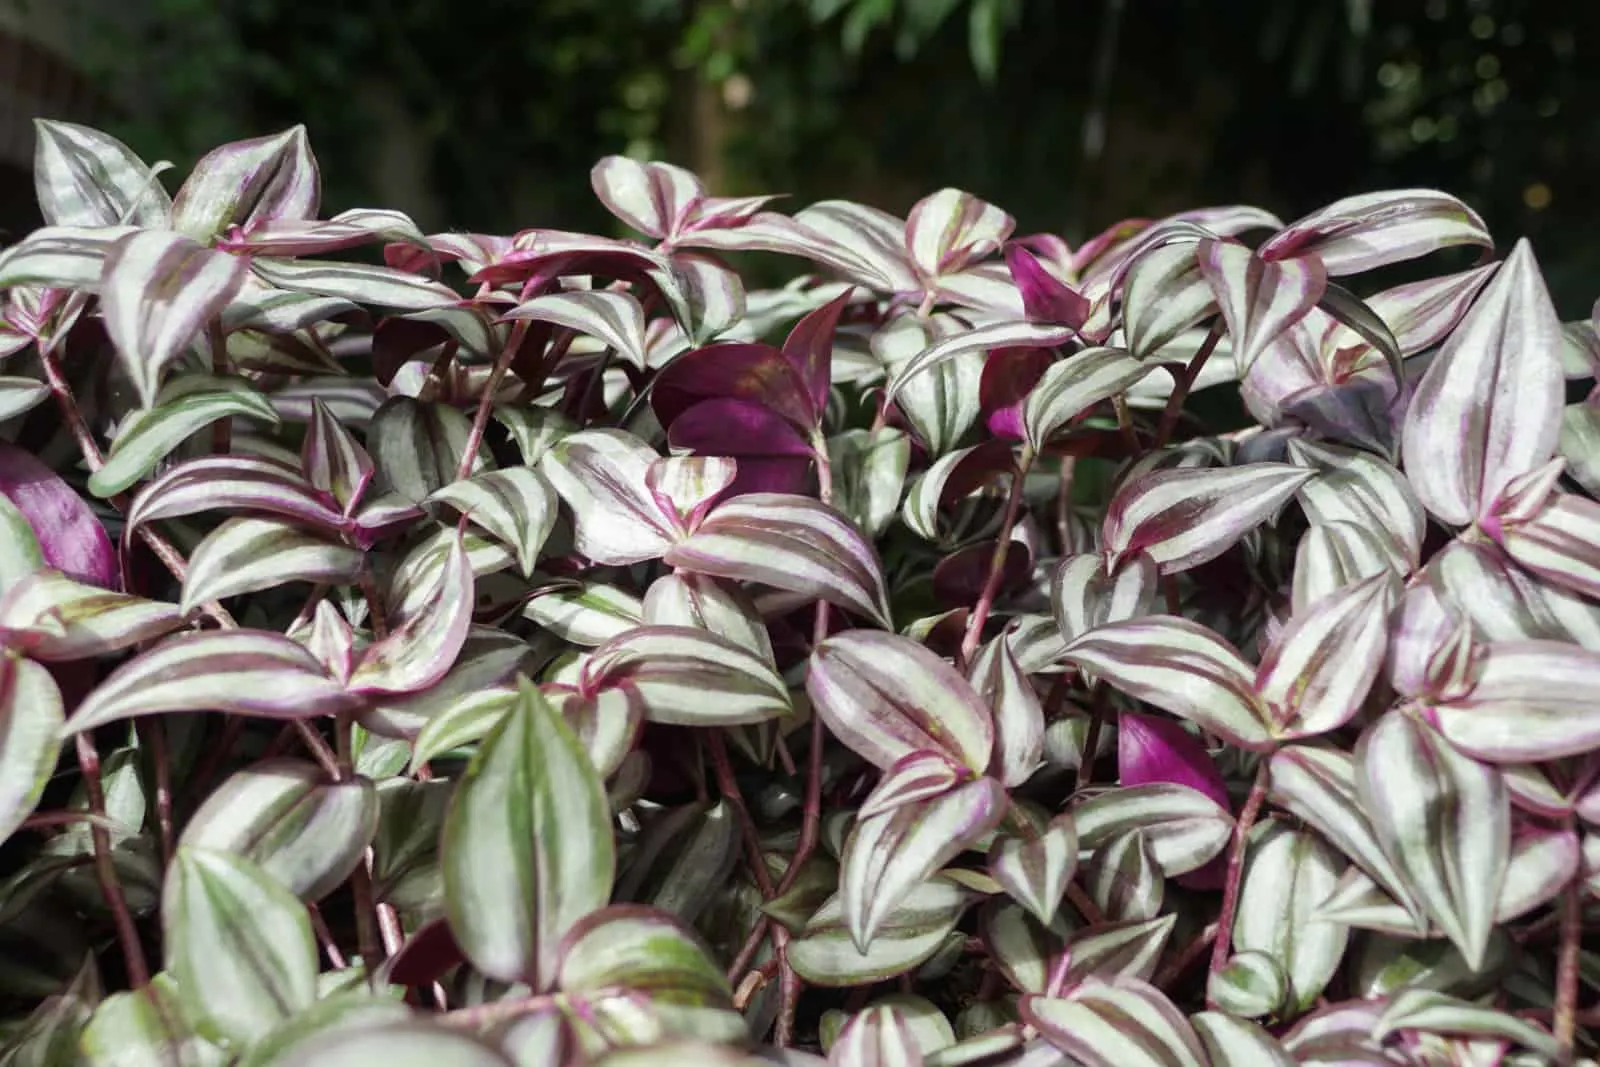 Tradescantia in purple and green color, also known as Wandering Jew plants